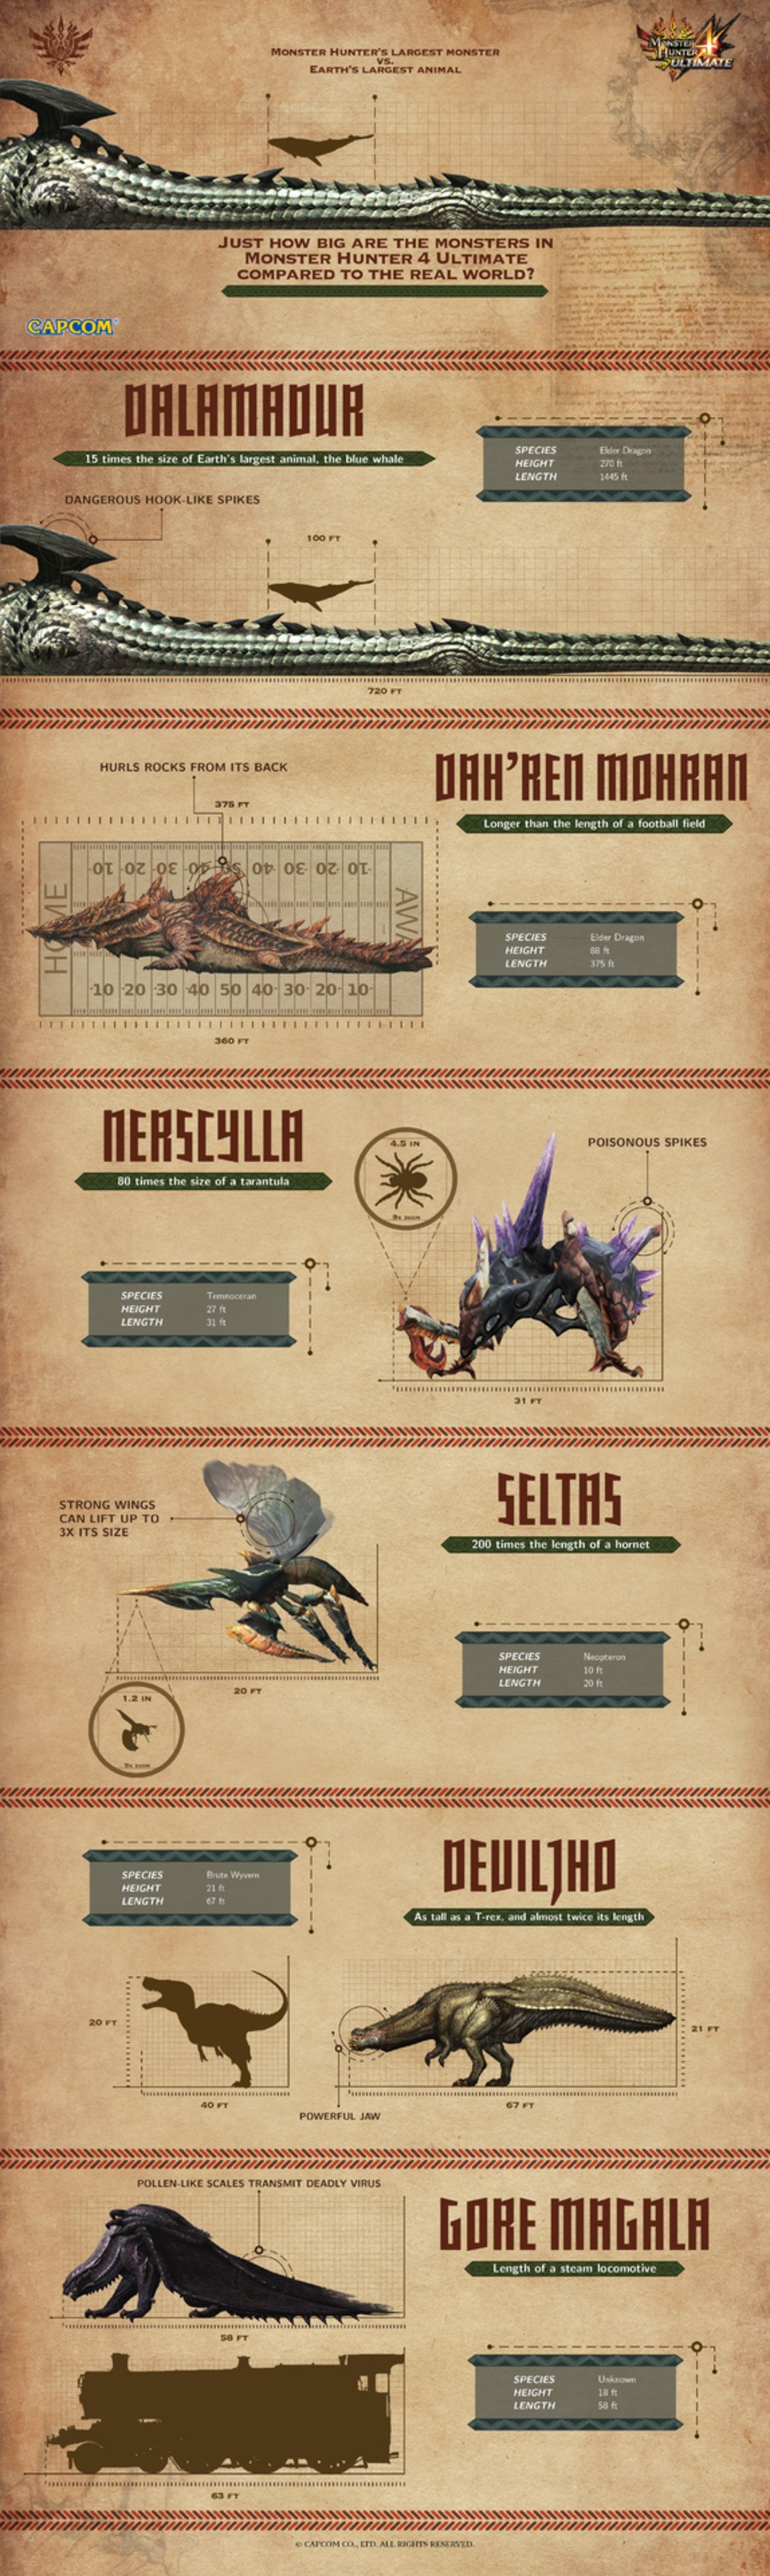 Monster Hunter 4 Ultimate Infographic Shows Off the Size of